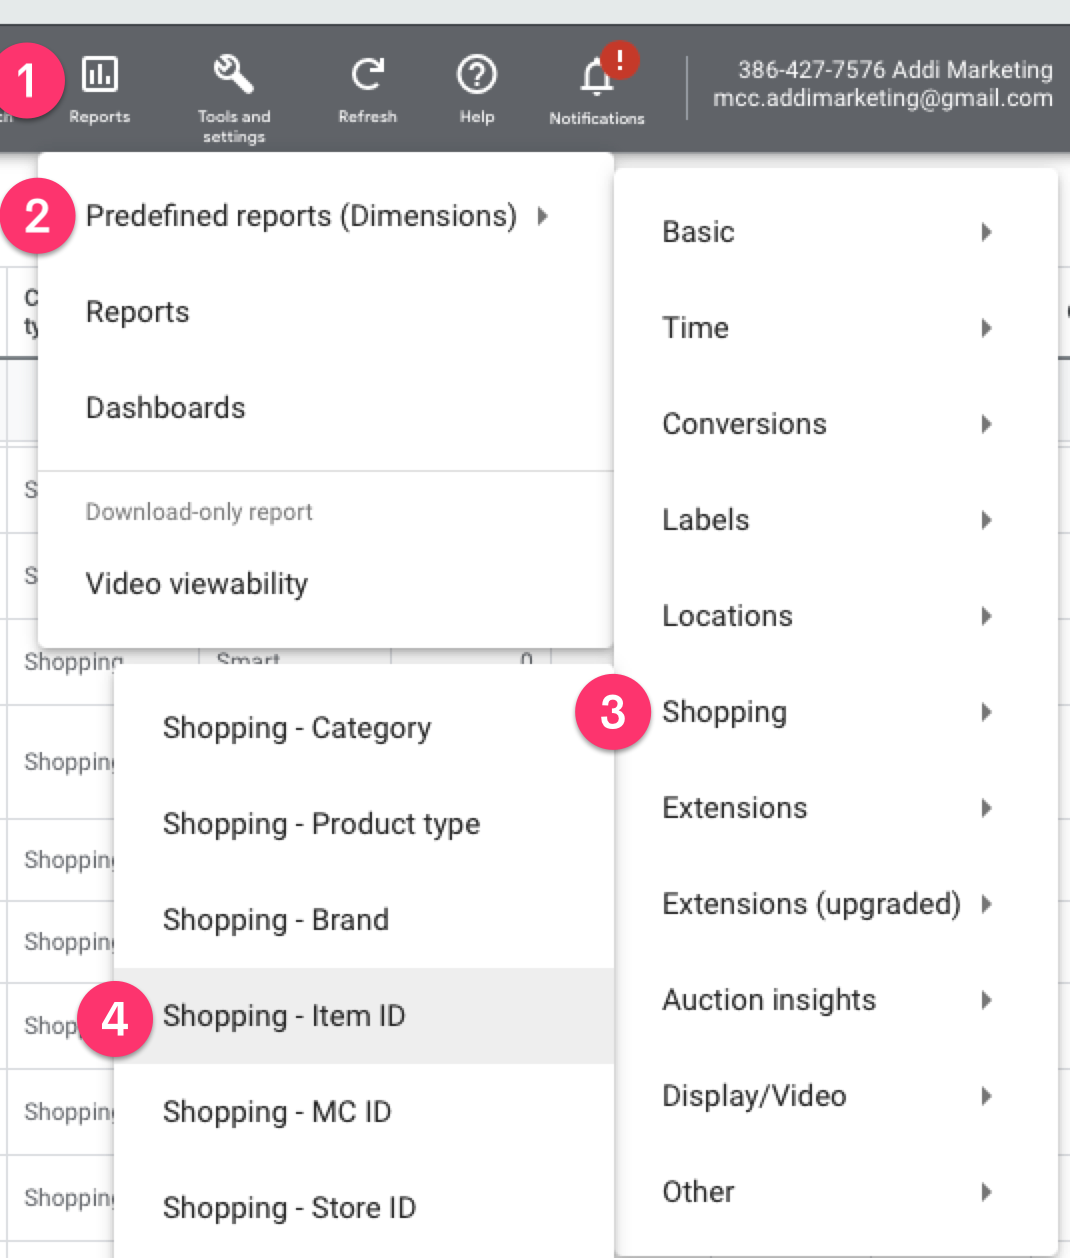 Account Structuring for Shopping Campaigns